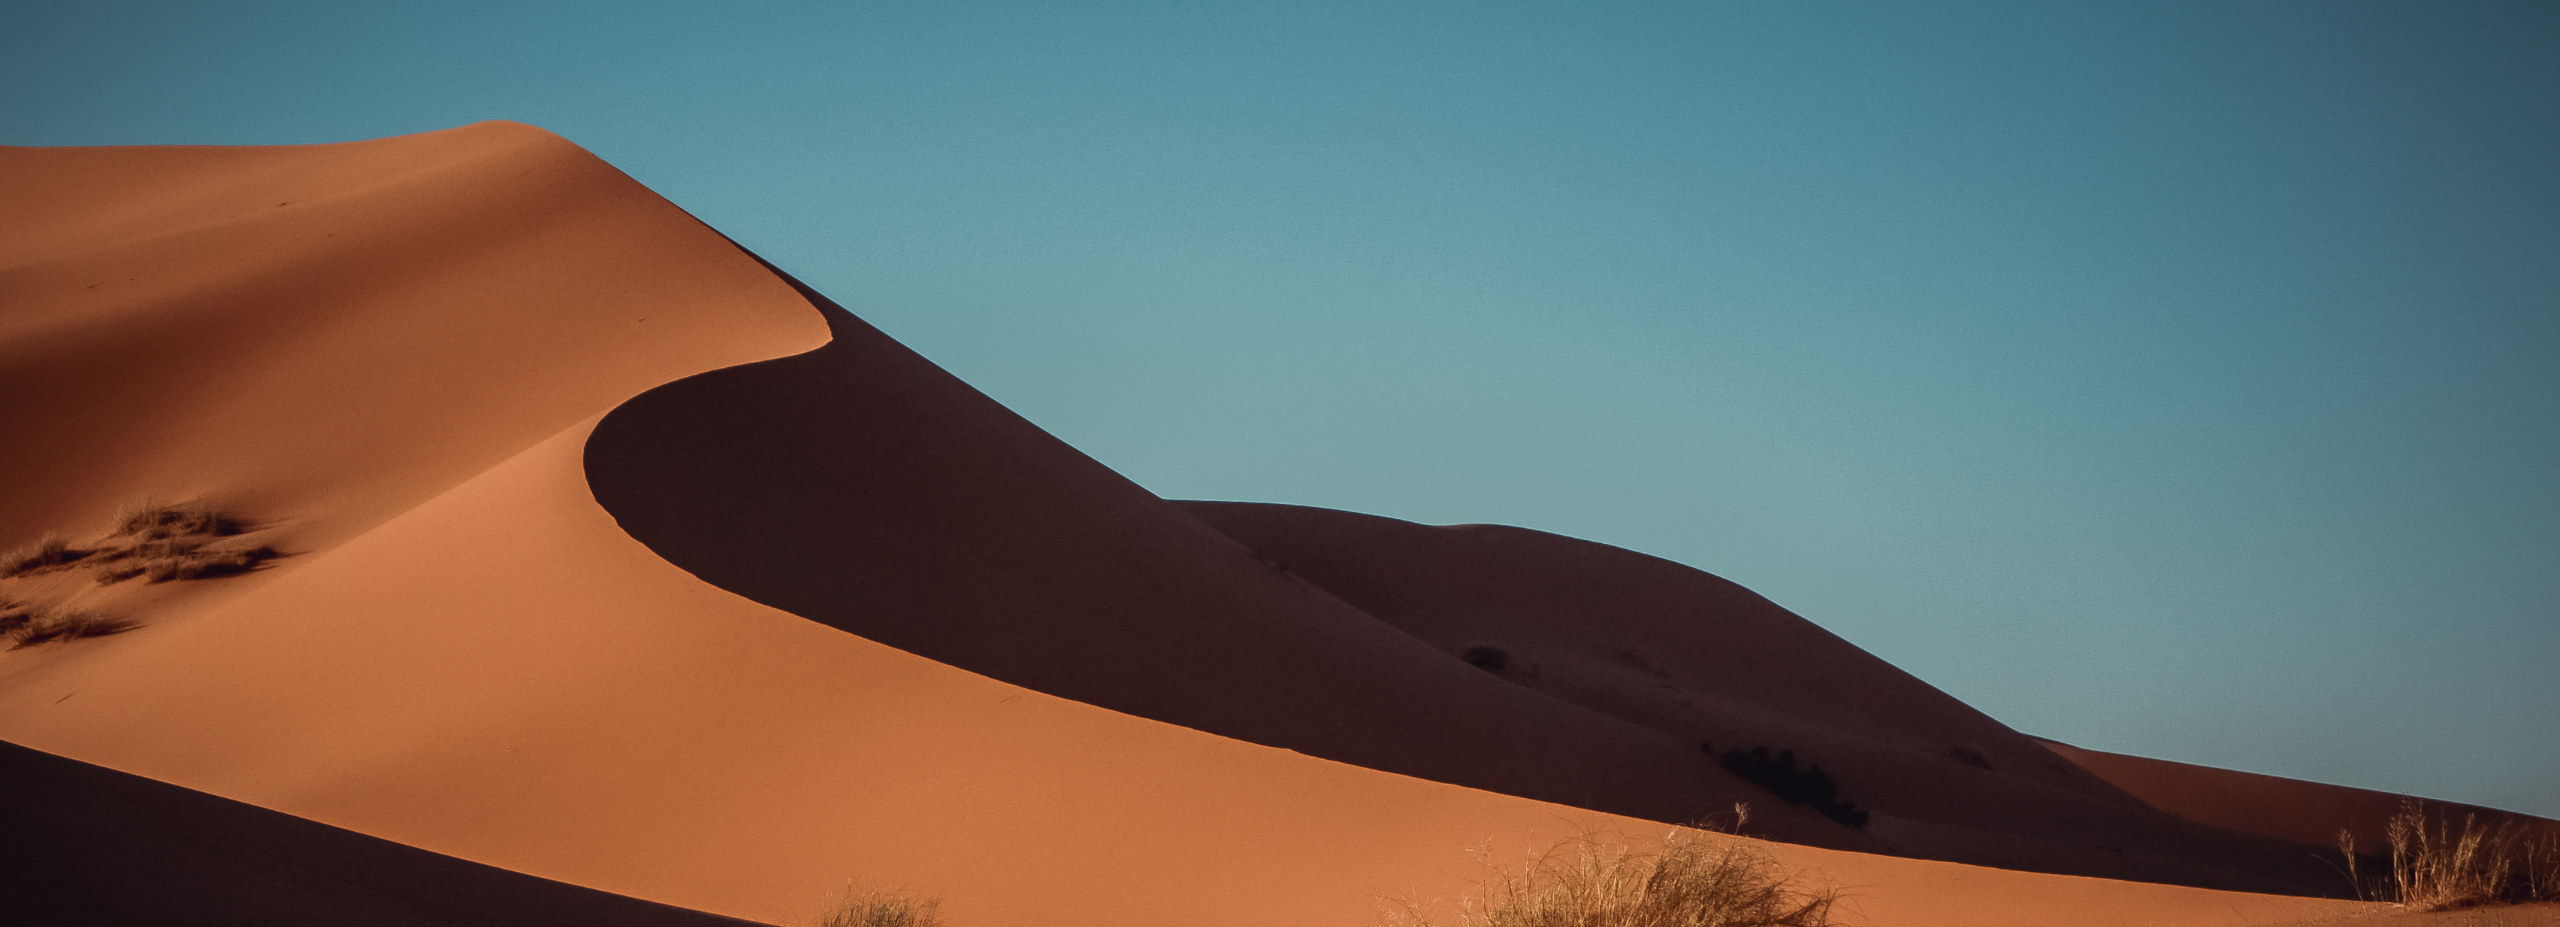 an image of a red sand dune against a blue sky